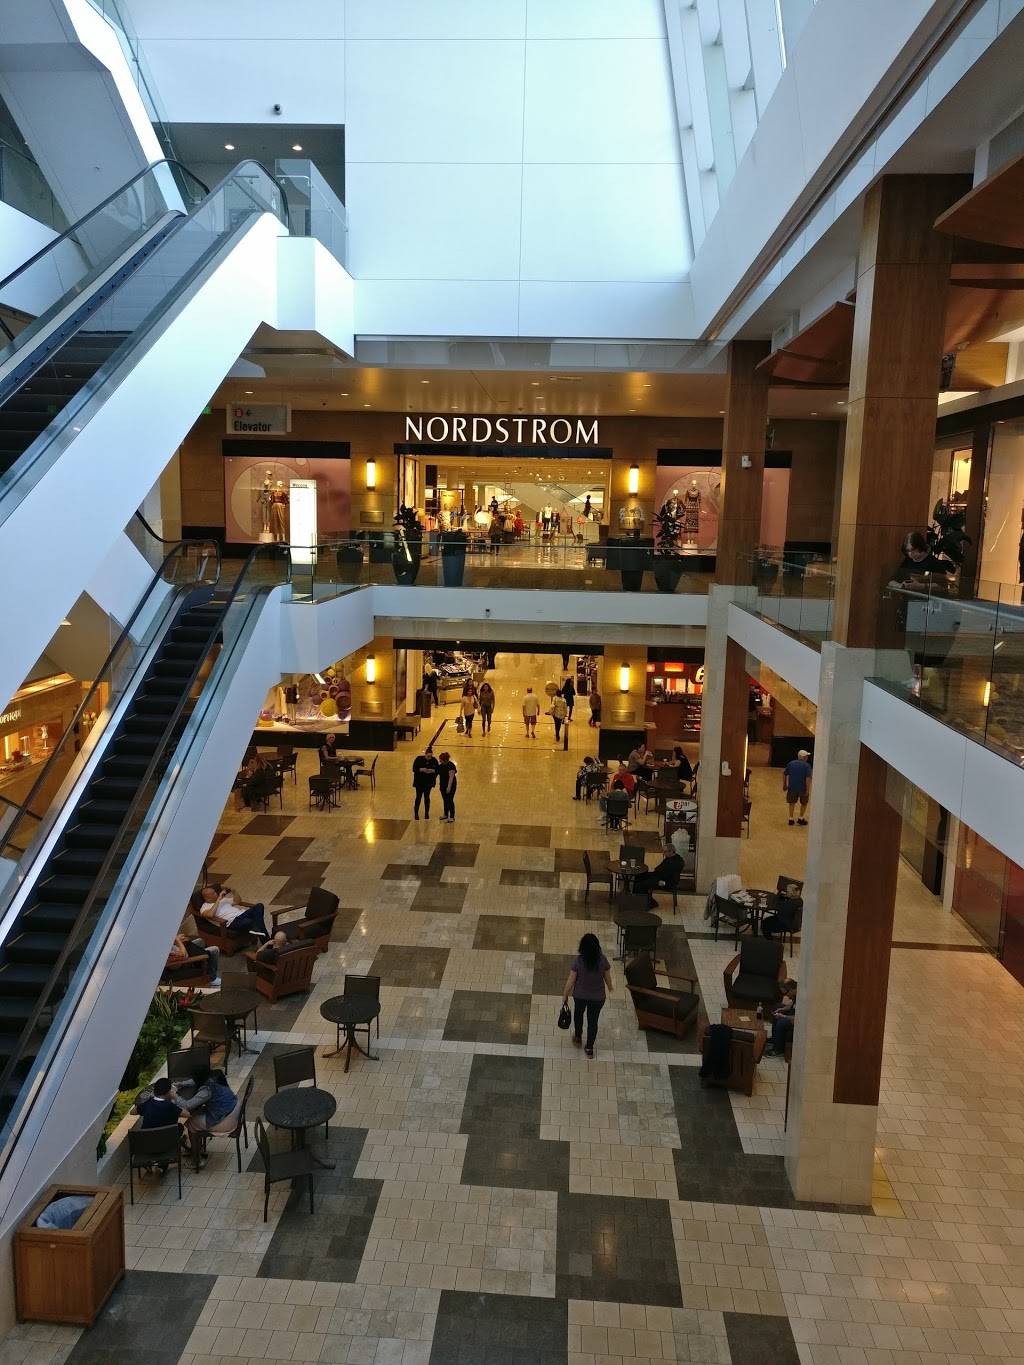 Thieves Hit Nordstrom at Westfield Topanga Mall – NBC Los Angeles